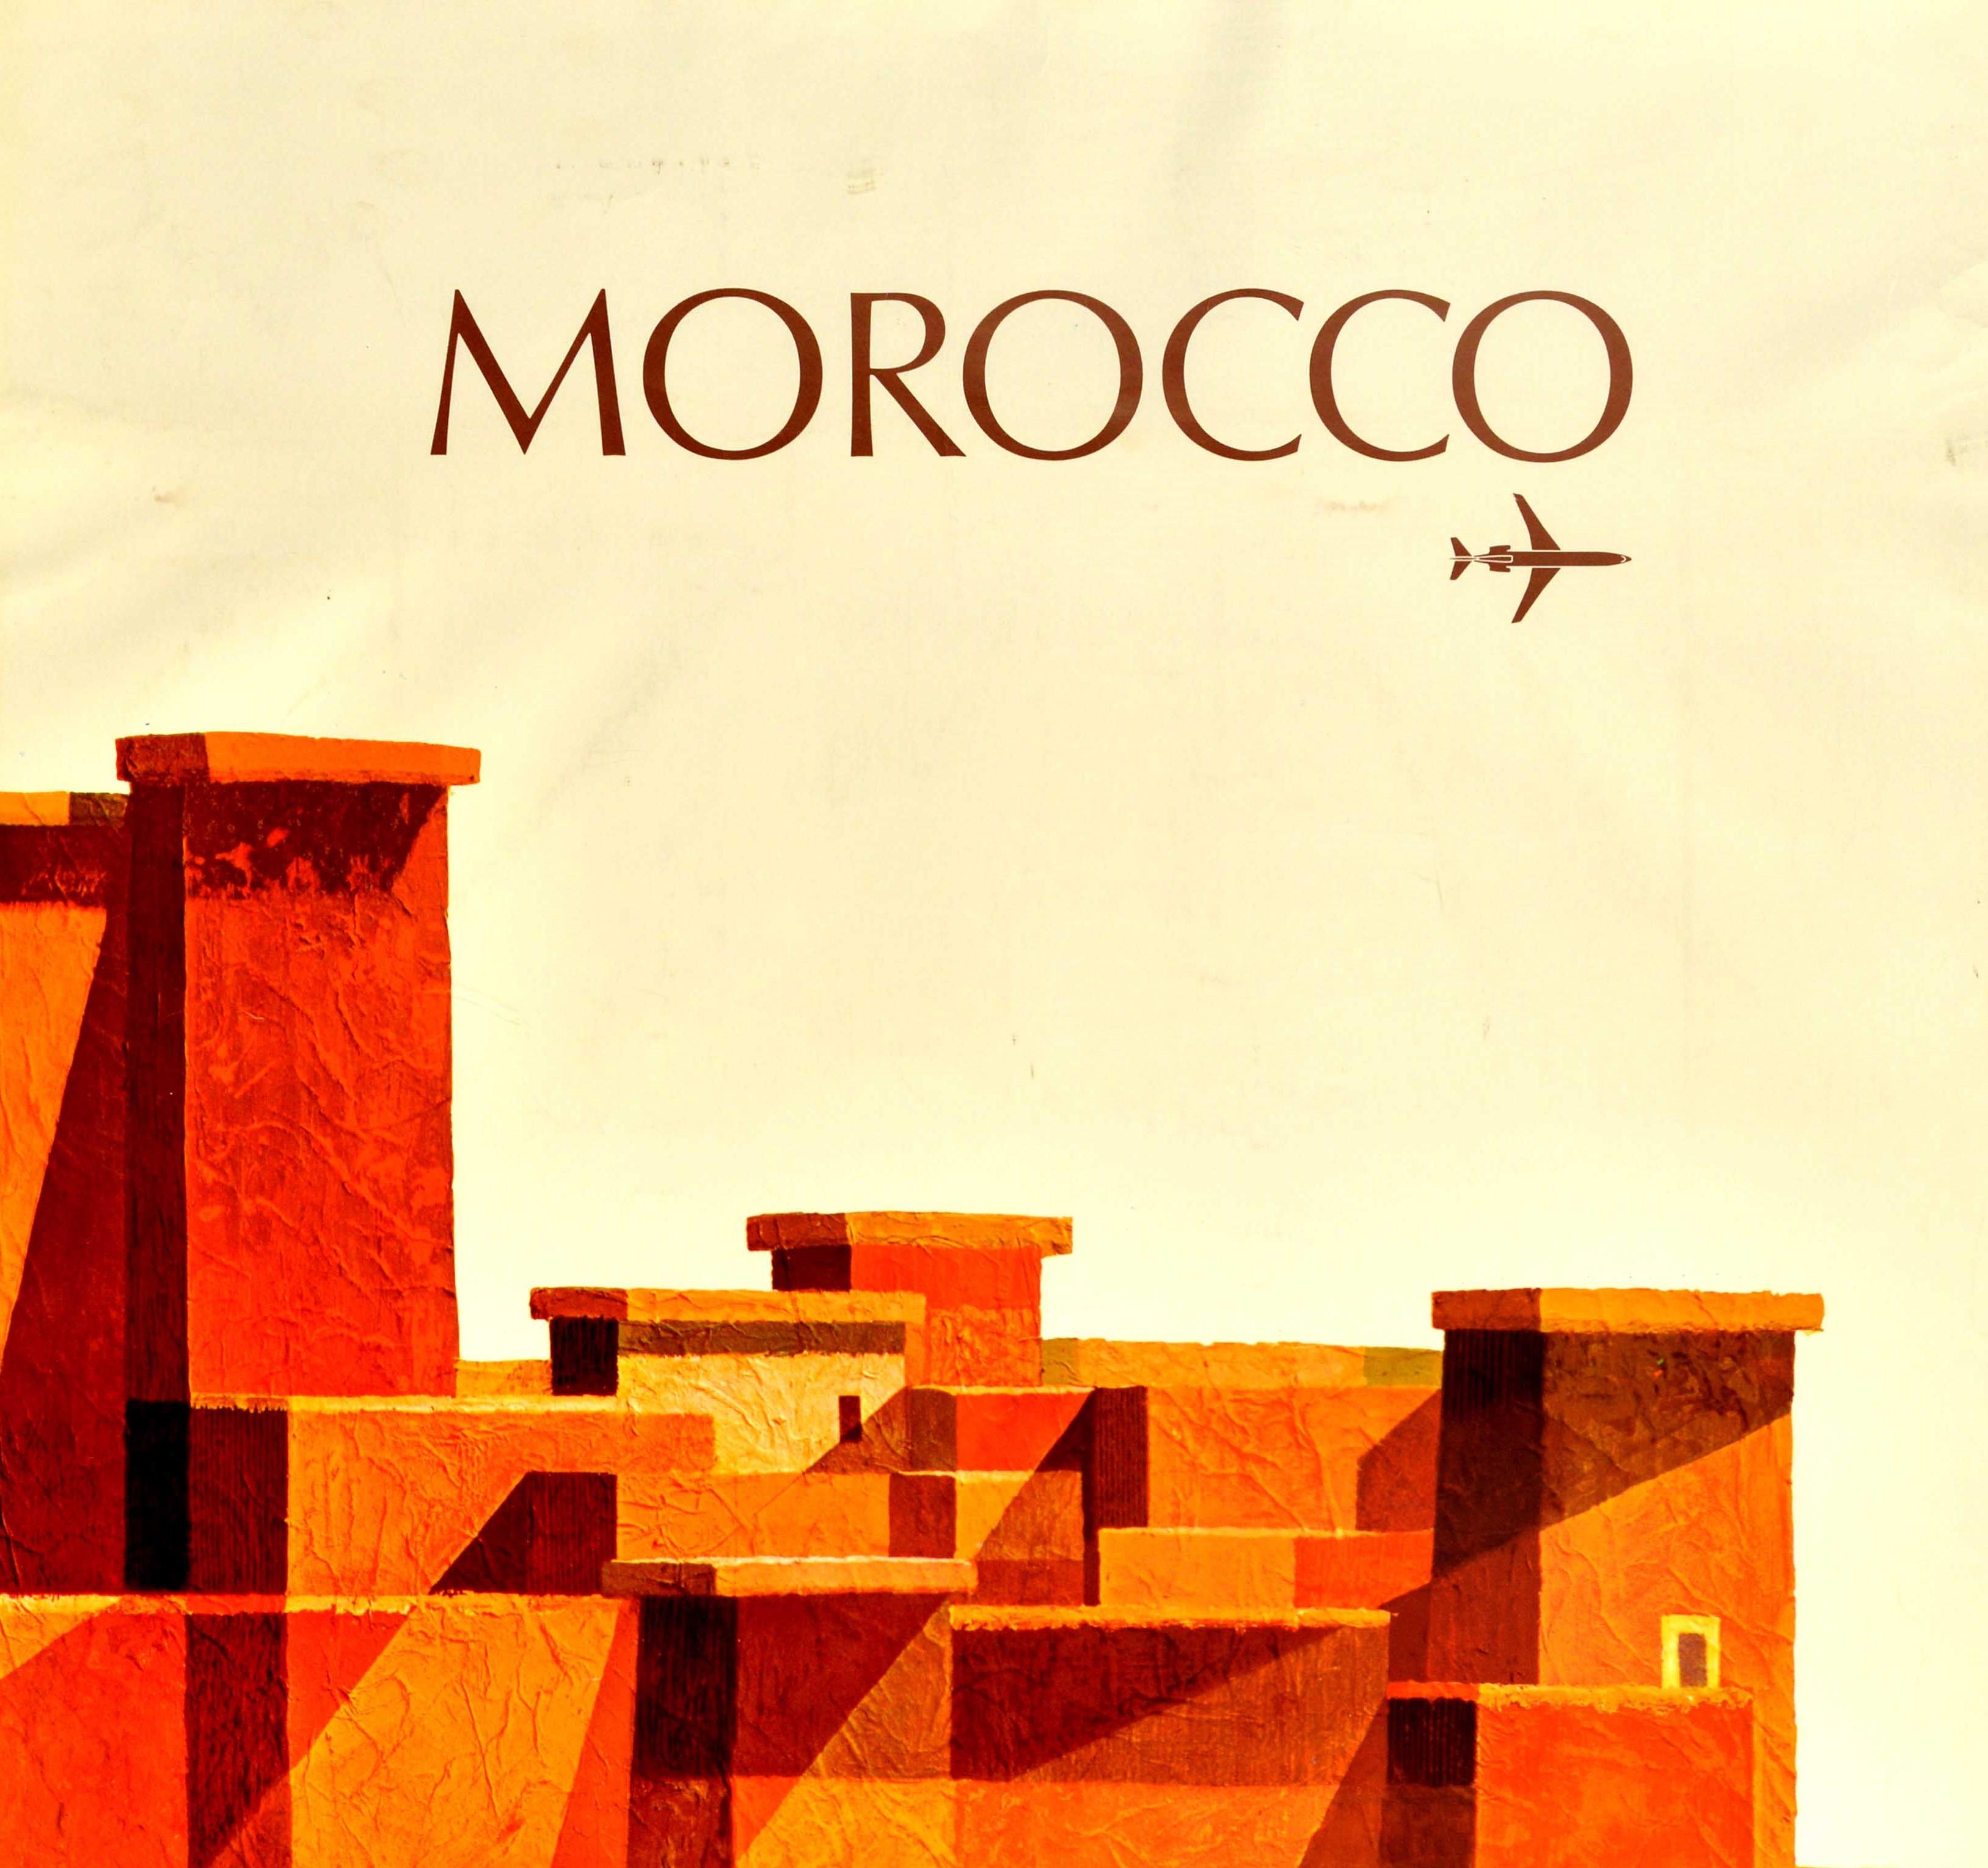 Original vintage travel advertising poster for Morocco Royal Air Maroc Moroccan International Airlines featuring stylized artwork depicting traditional Moroccan buildings with a plane flying overhead and the text above and below against a white